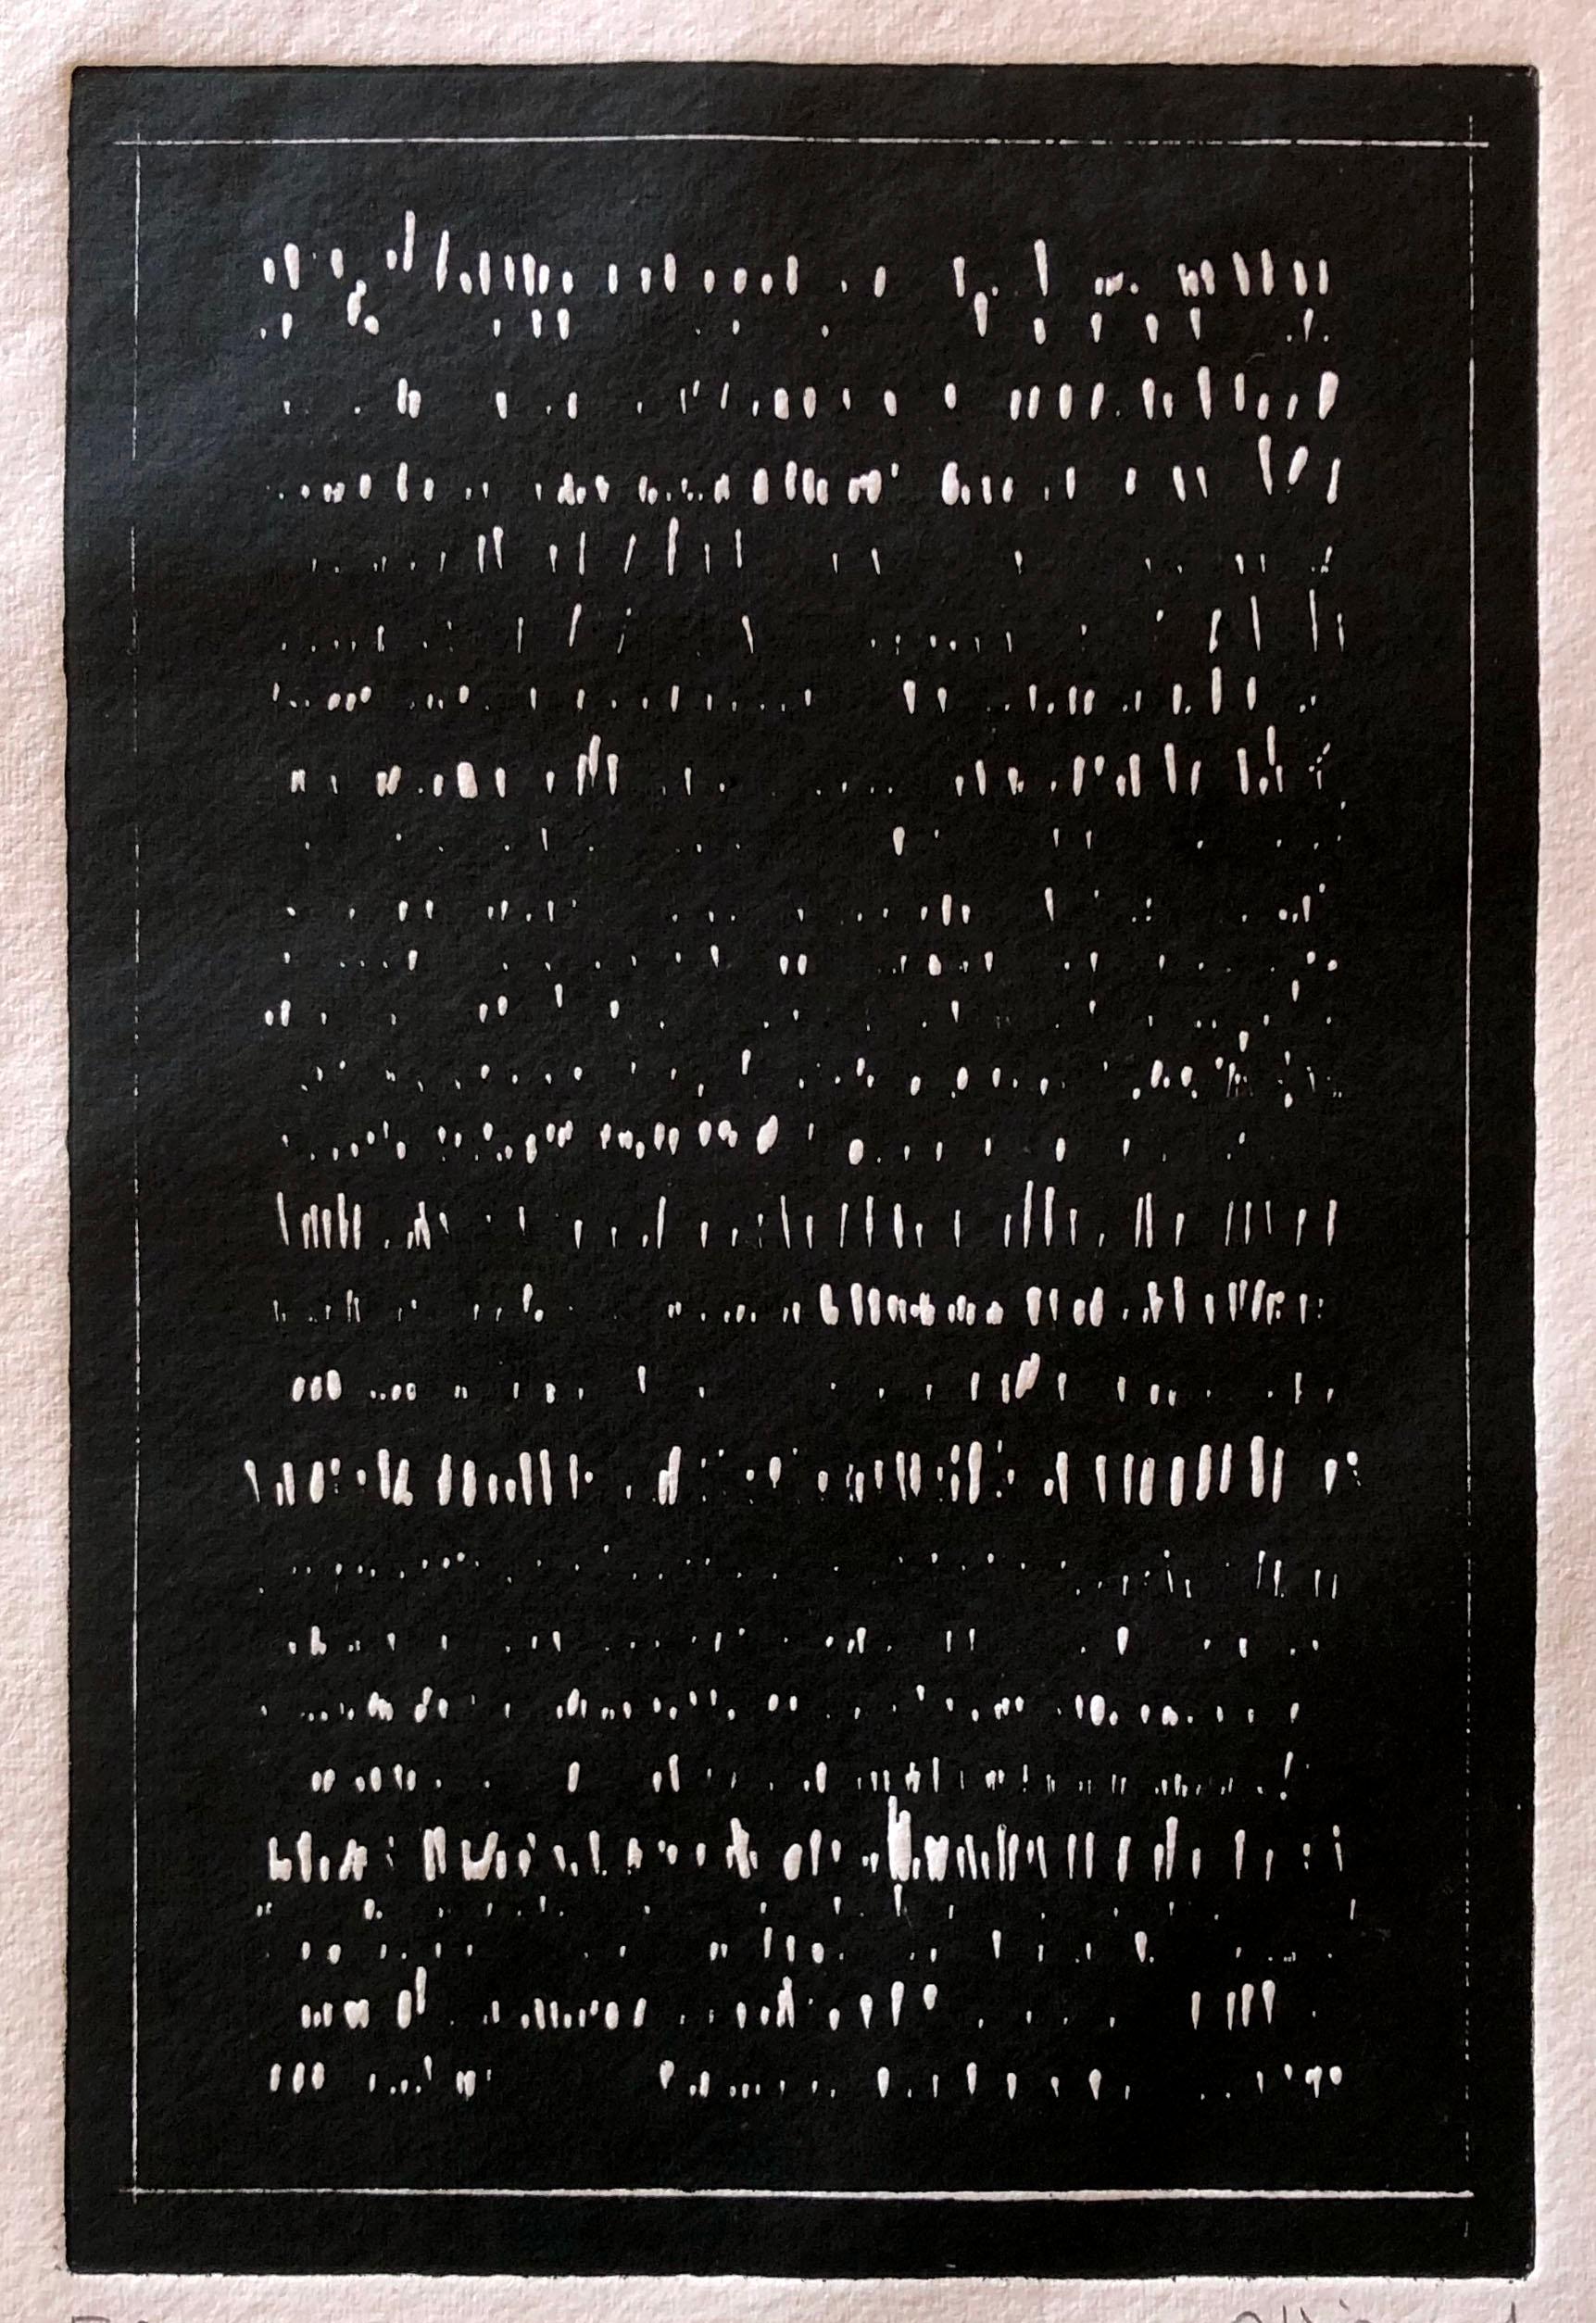 Etching on woven paper,  This piece was completed during Allirand's time as Resident Artist at the French Institute of Tangier, 2017. Artist Proof, Signed in pencil.

"To write a word or to trace a line, the idea remains the same one: to release